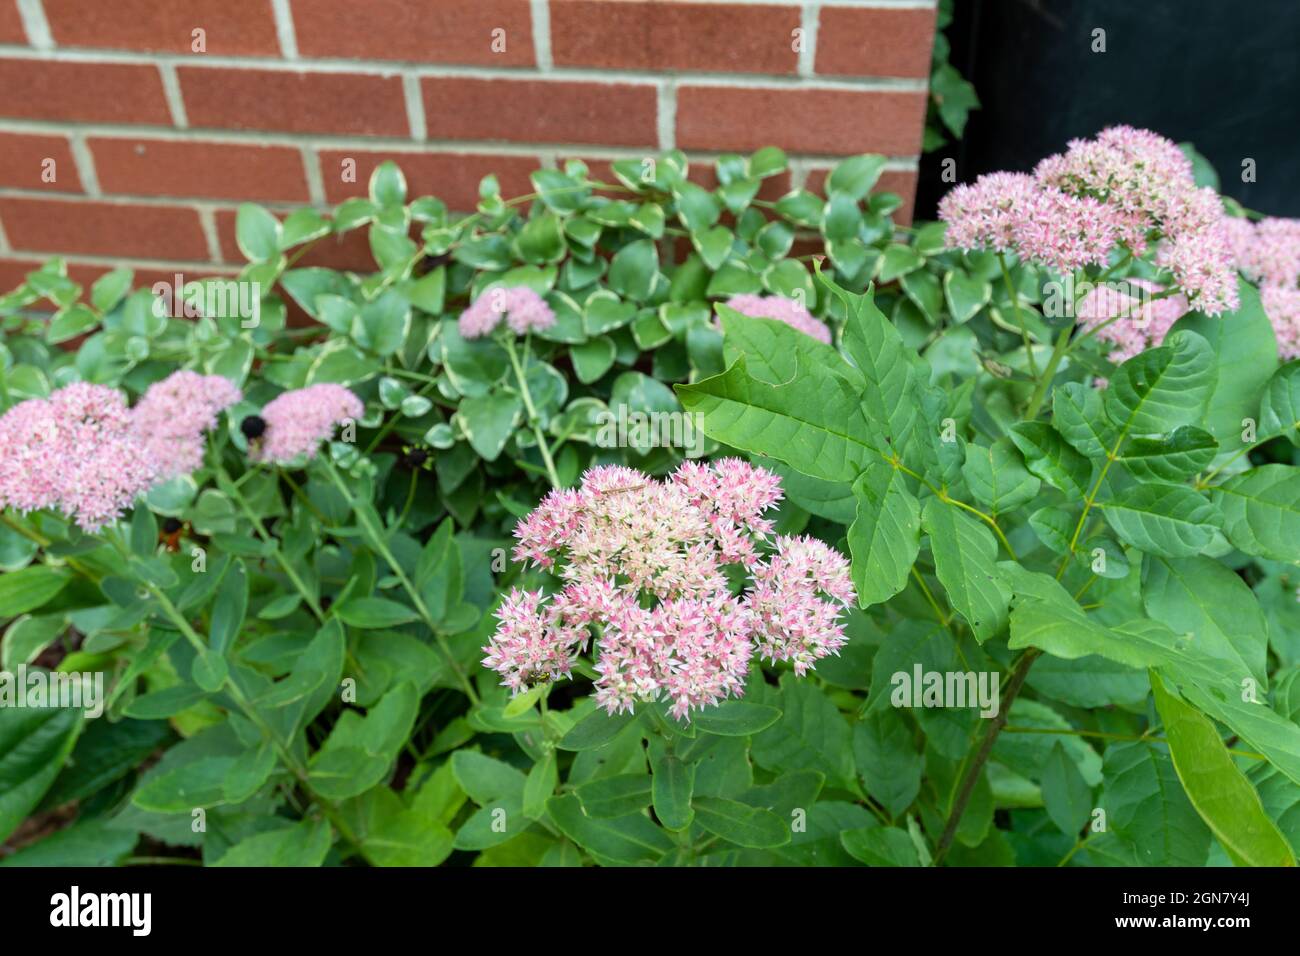 Hylotelephium Telephium flowers blooming in a garden at the end of summer Stock Photo